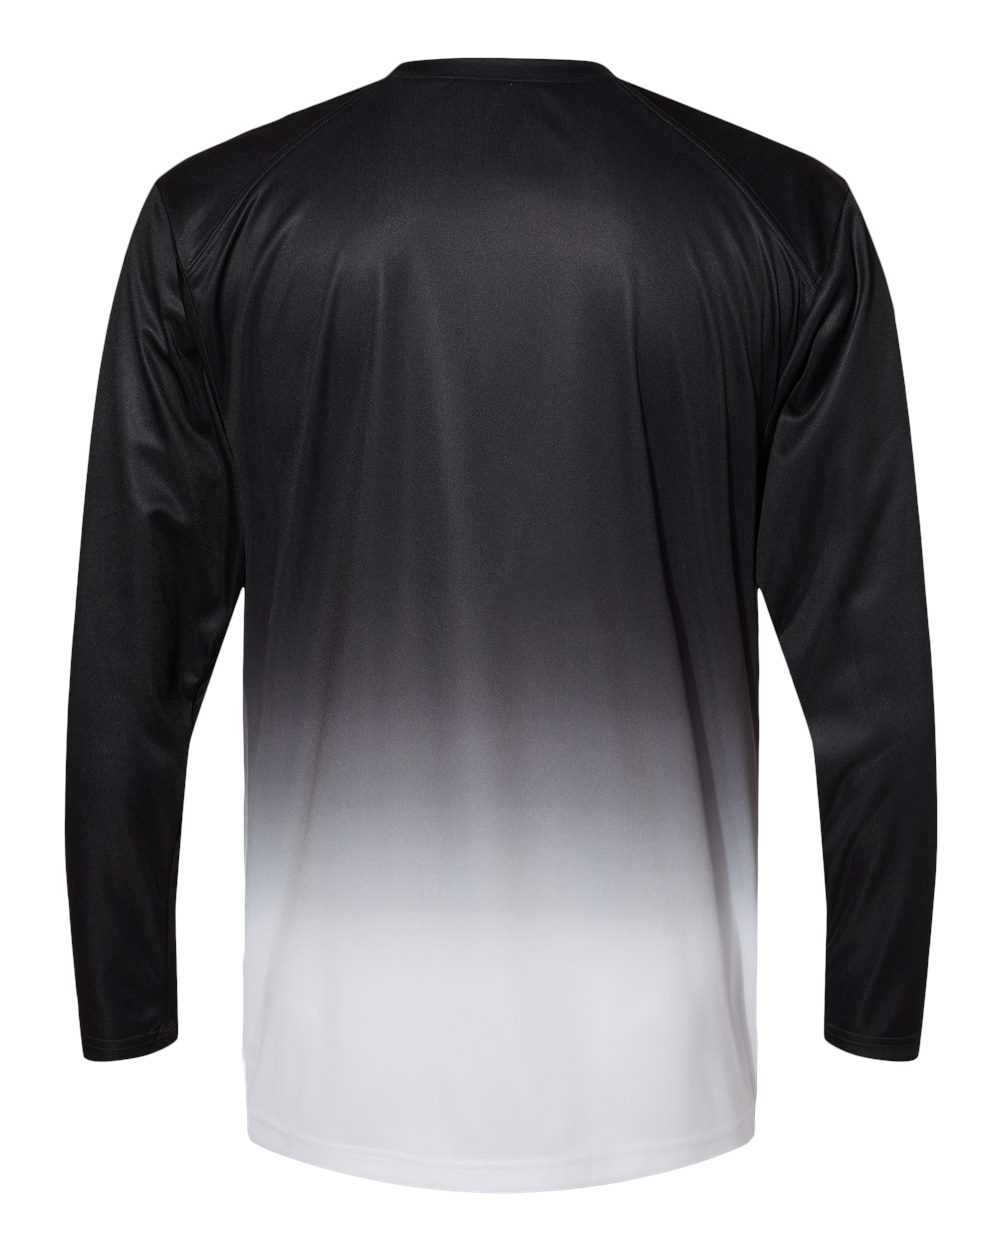 Black White Fade Ombre Long Sleeve Shirts